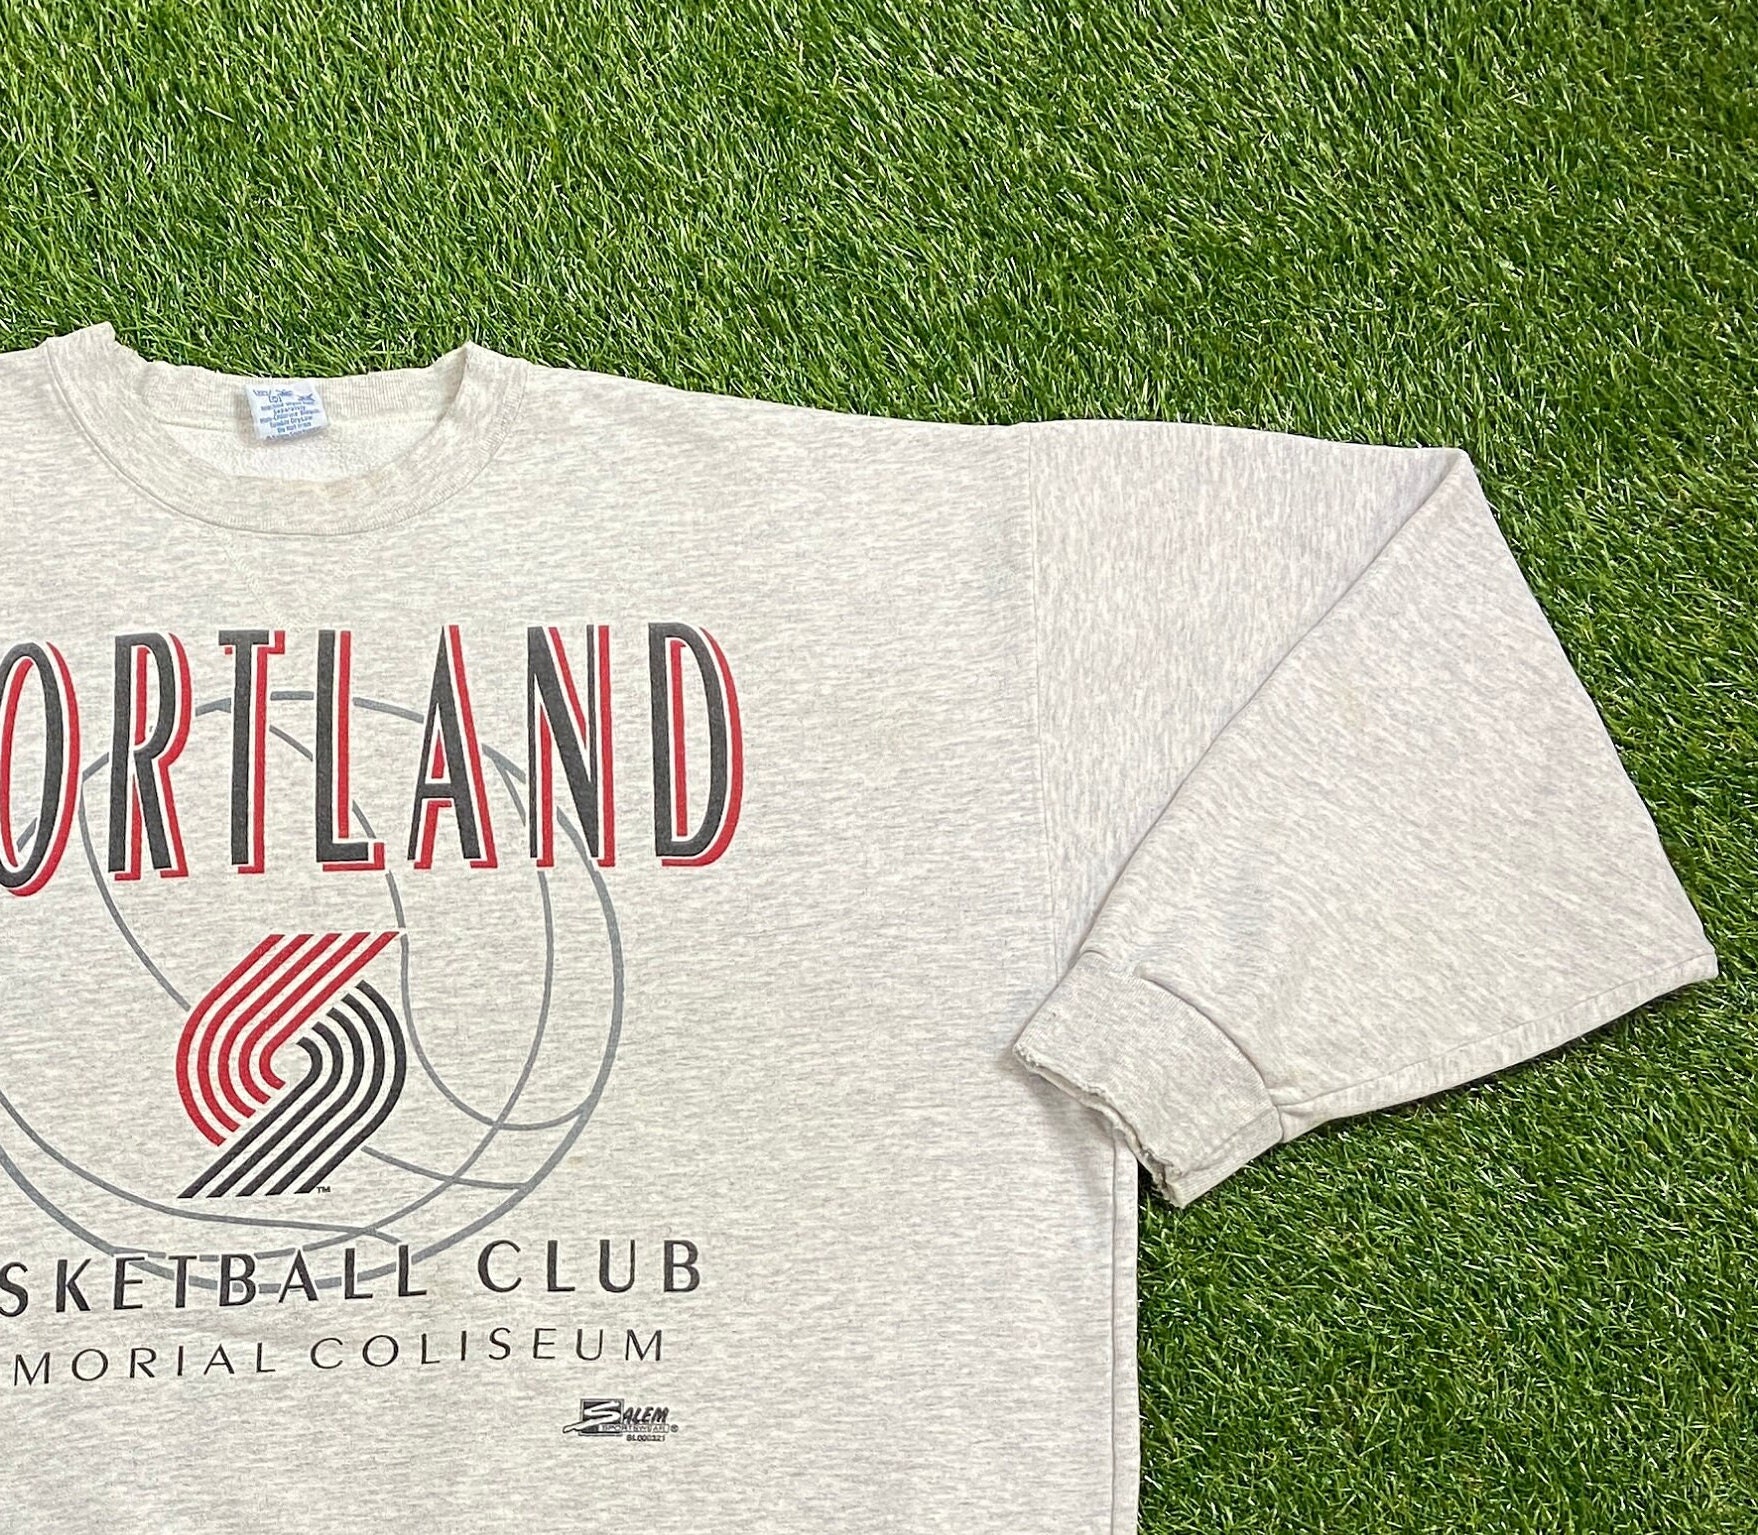 American Classic 90s Portland Trail Blazers Vintage NBA Crewneck Sweatshirt. Made in The USA. Stitched Graphic.